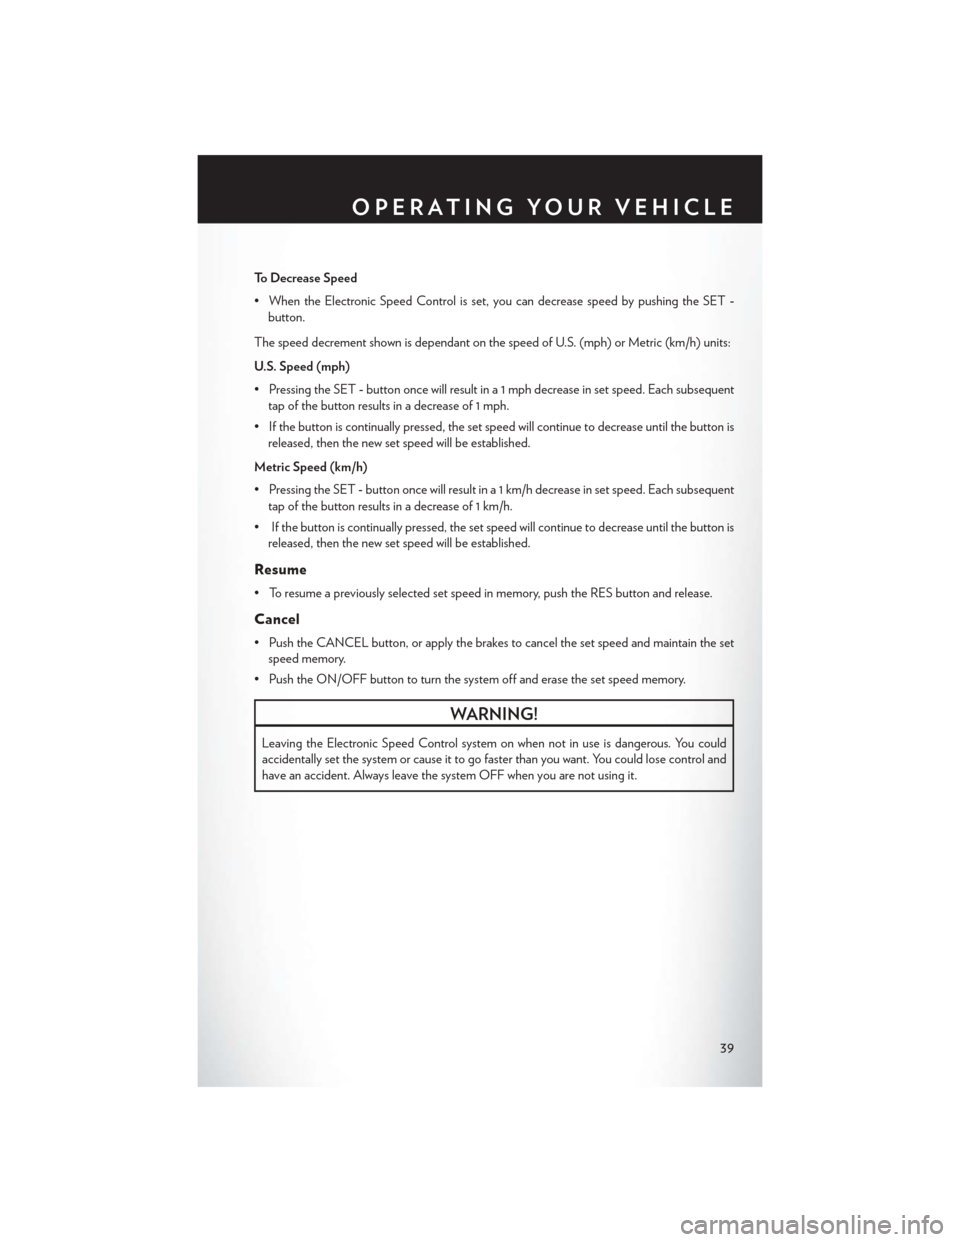 CHRYSLER 200 2015 2.G Service Manual To Decrease Speed
• When the Electronic Speed Control is set, you can decrease speed by pushing the SET-
button.
The speed decrement shown is dependant on the speed of U.S. (mph) or Metric (km/h) un